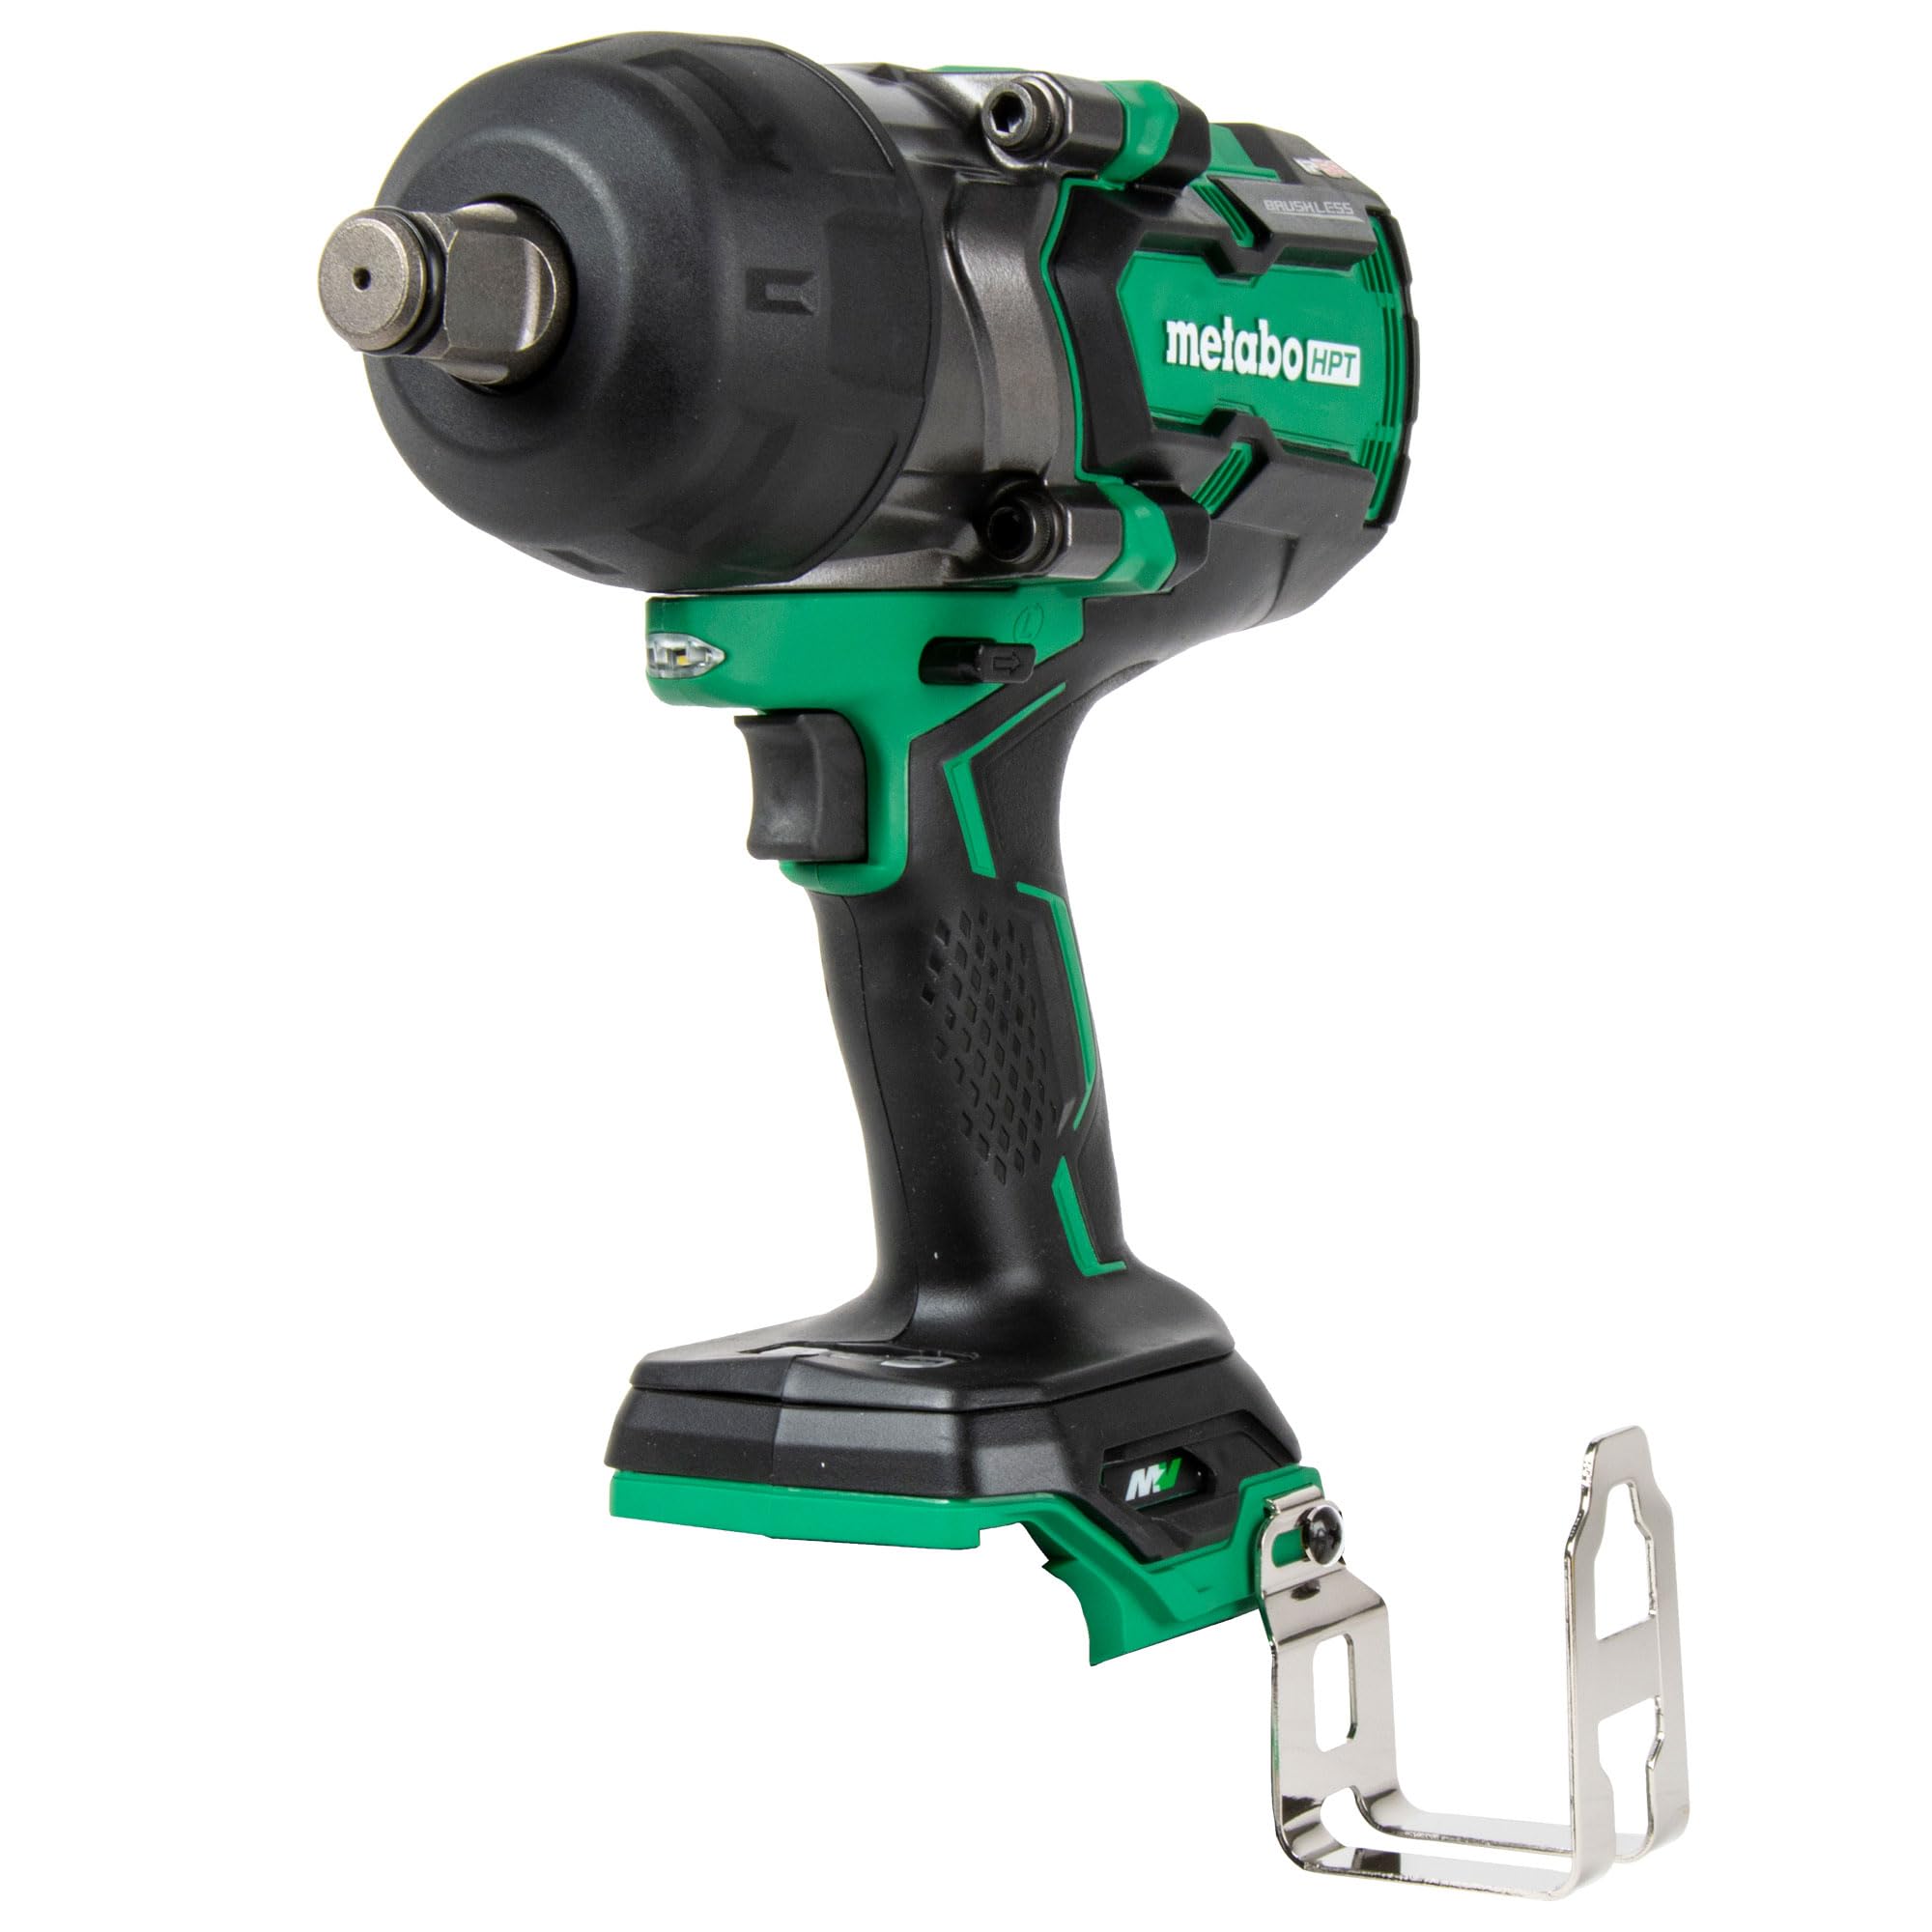 Metabo HPT 36V MultiVolt™ Cordless Impact Wrench | Tool Only - No Battery | High-Torque | 3/4-Inch Drive | 4-Stage Speed Switch | Auto Stop/Auto Slow System | IP56 Dust & Water Resistant | WR36DFQ4